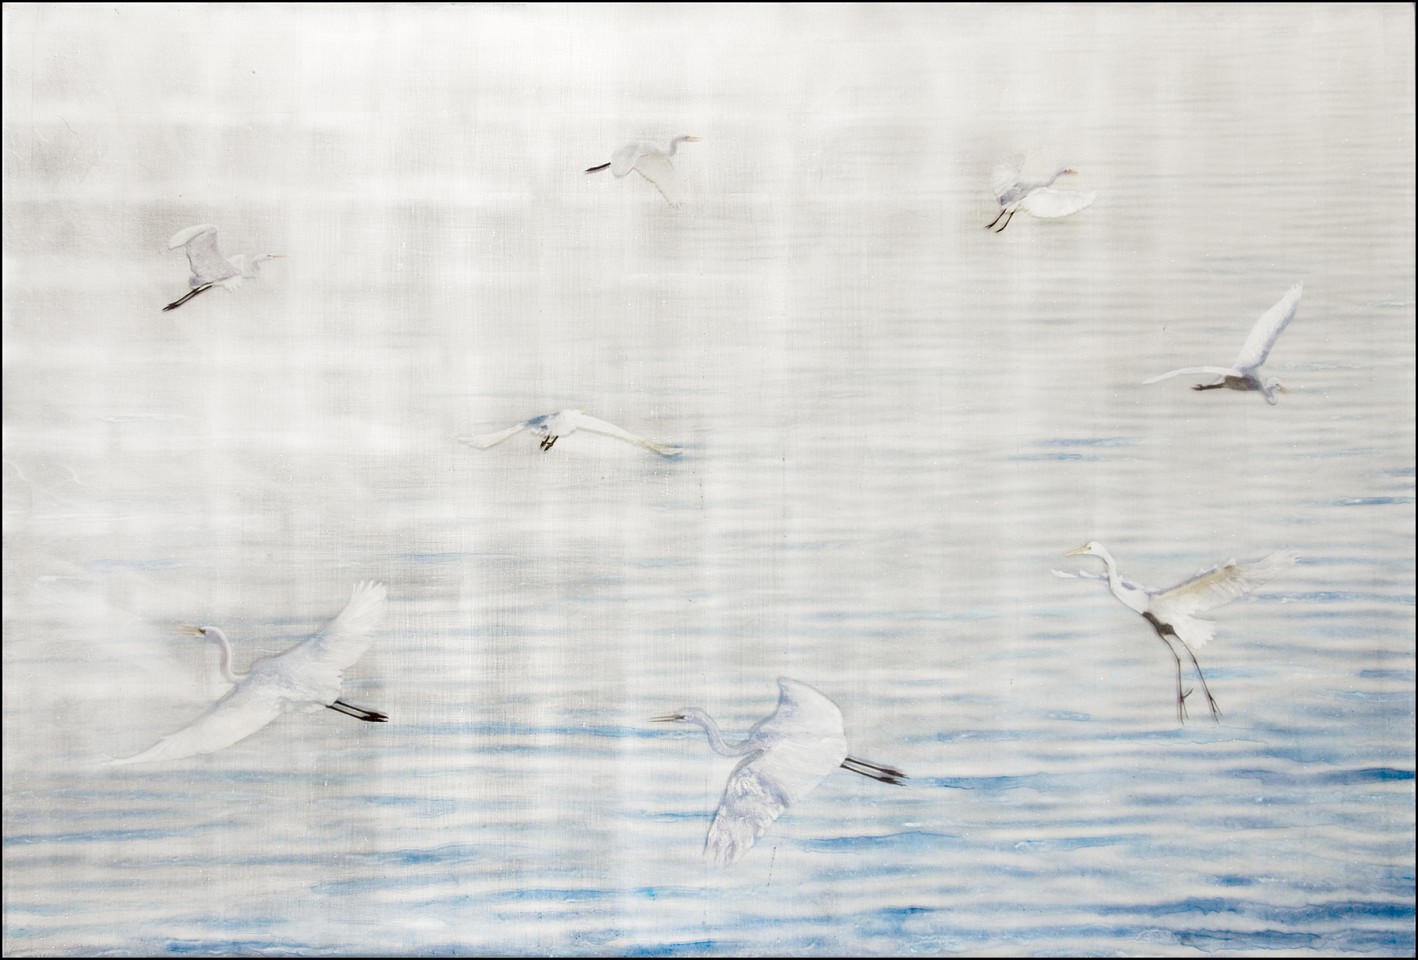 Susan Goldsmith, Eight Herons, 2015
Silver Leaf with Pigment Prints, Oil Pastel, Acrylic Paint,  Watercolors, Crystalina and Resin on Panel, 40 x 60 in.